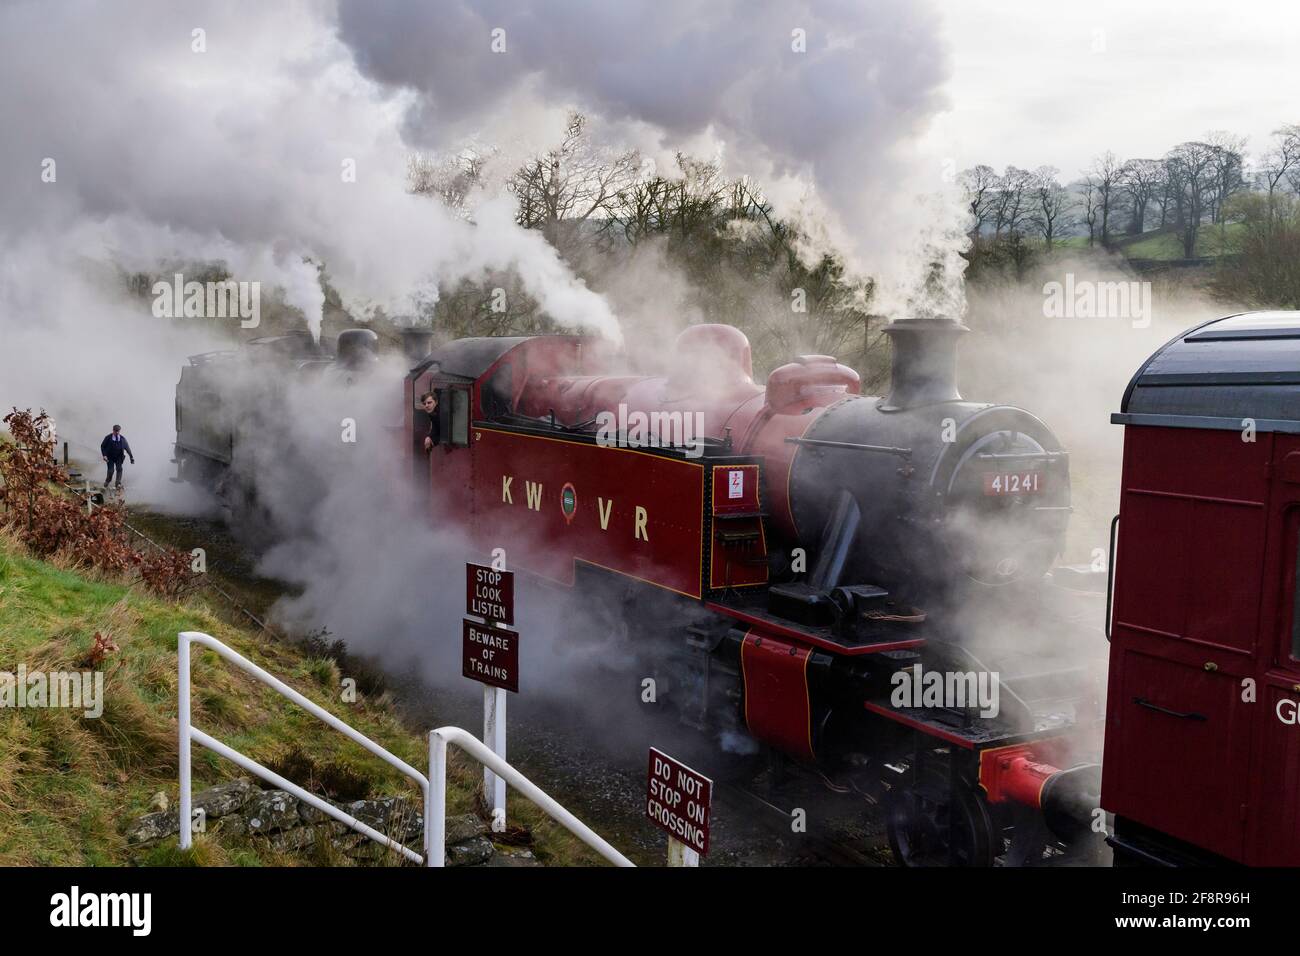 Historic steam trains (locos) puffing dramatic smoke clouds stopped at crossing (engine driver in cab) - heritage railway, KWVR, Yorkshire England UK. Stock Photo